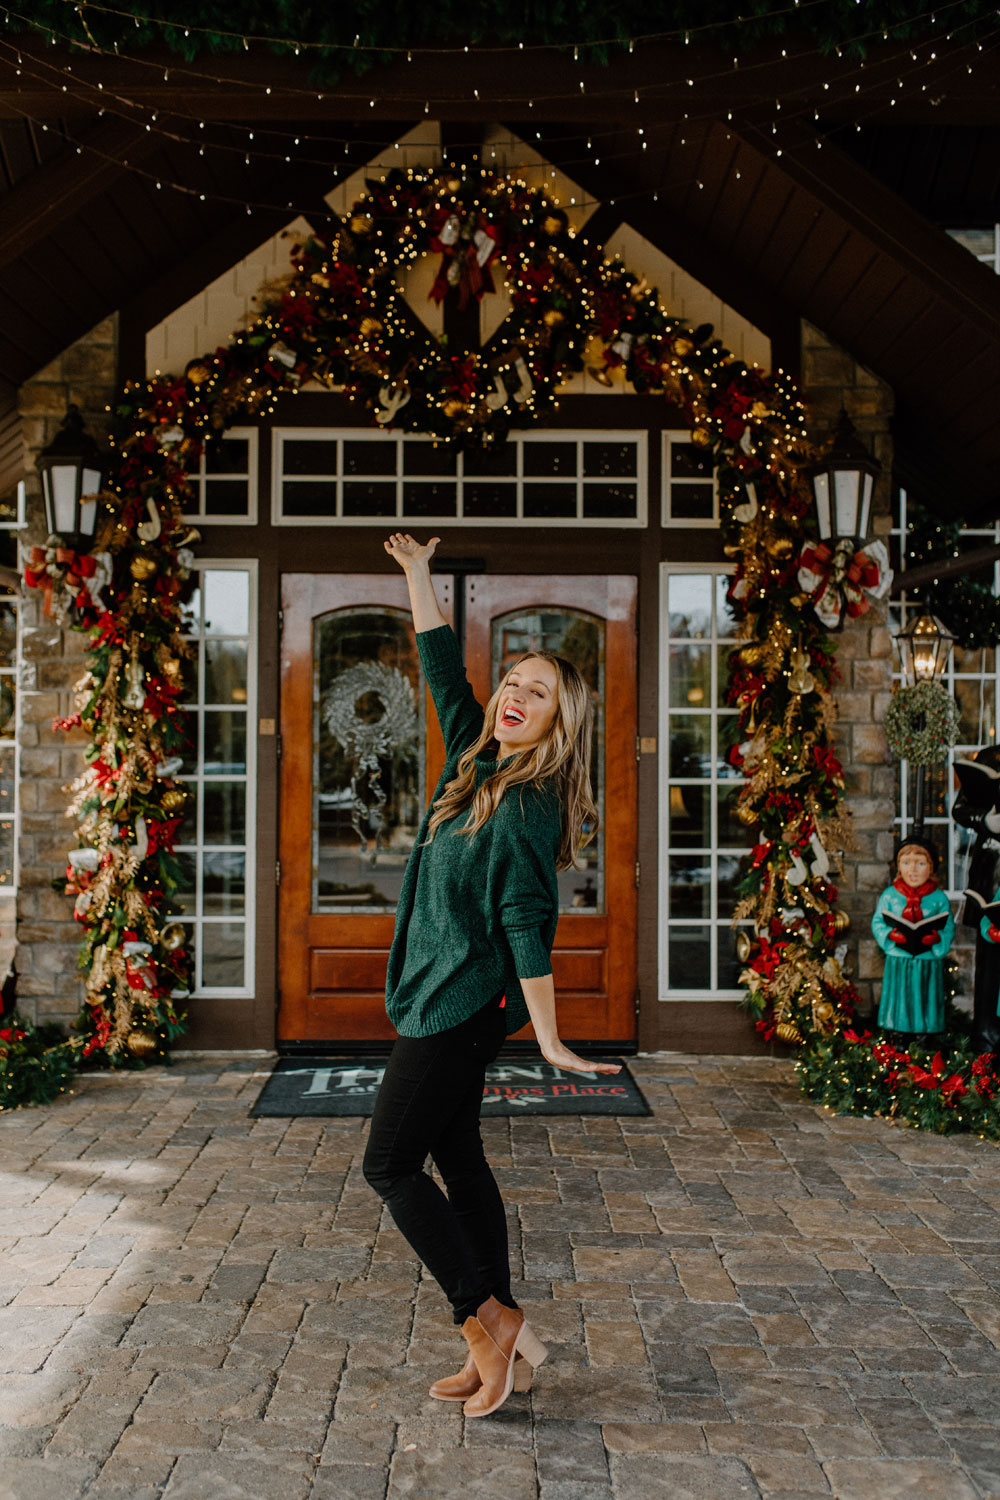 Small Town Christmas - Pigeon Forge, TN